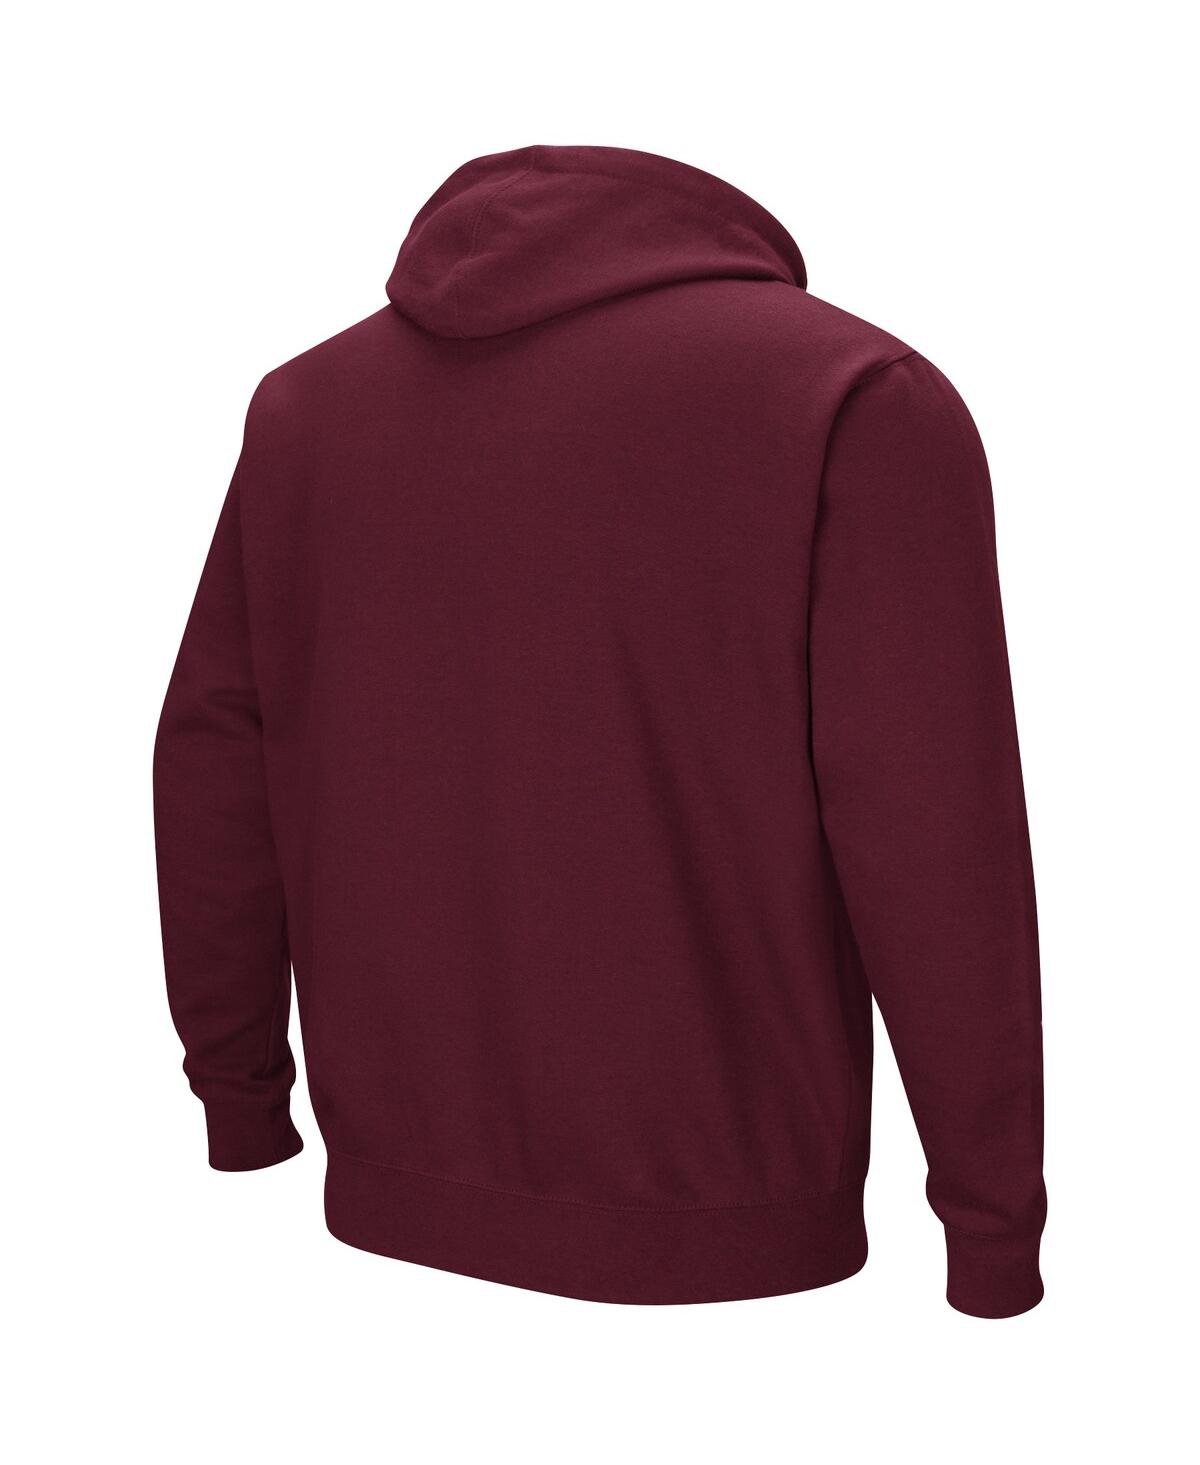 Shop Colosseum Men's  Maroon Charleston Cougars Arch & Logo Pullover Hoodie